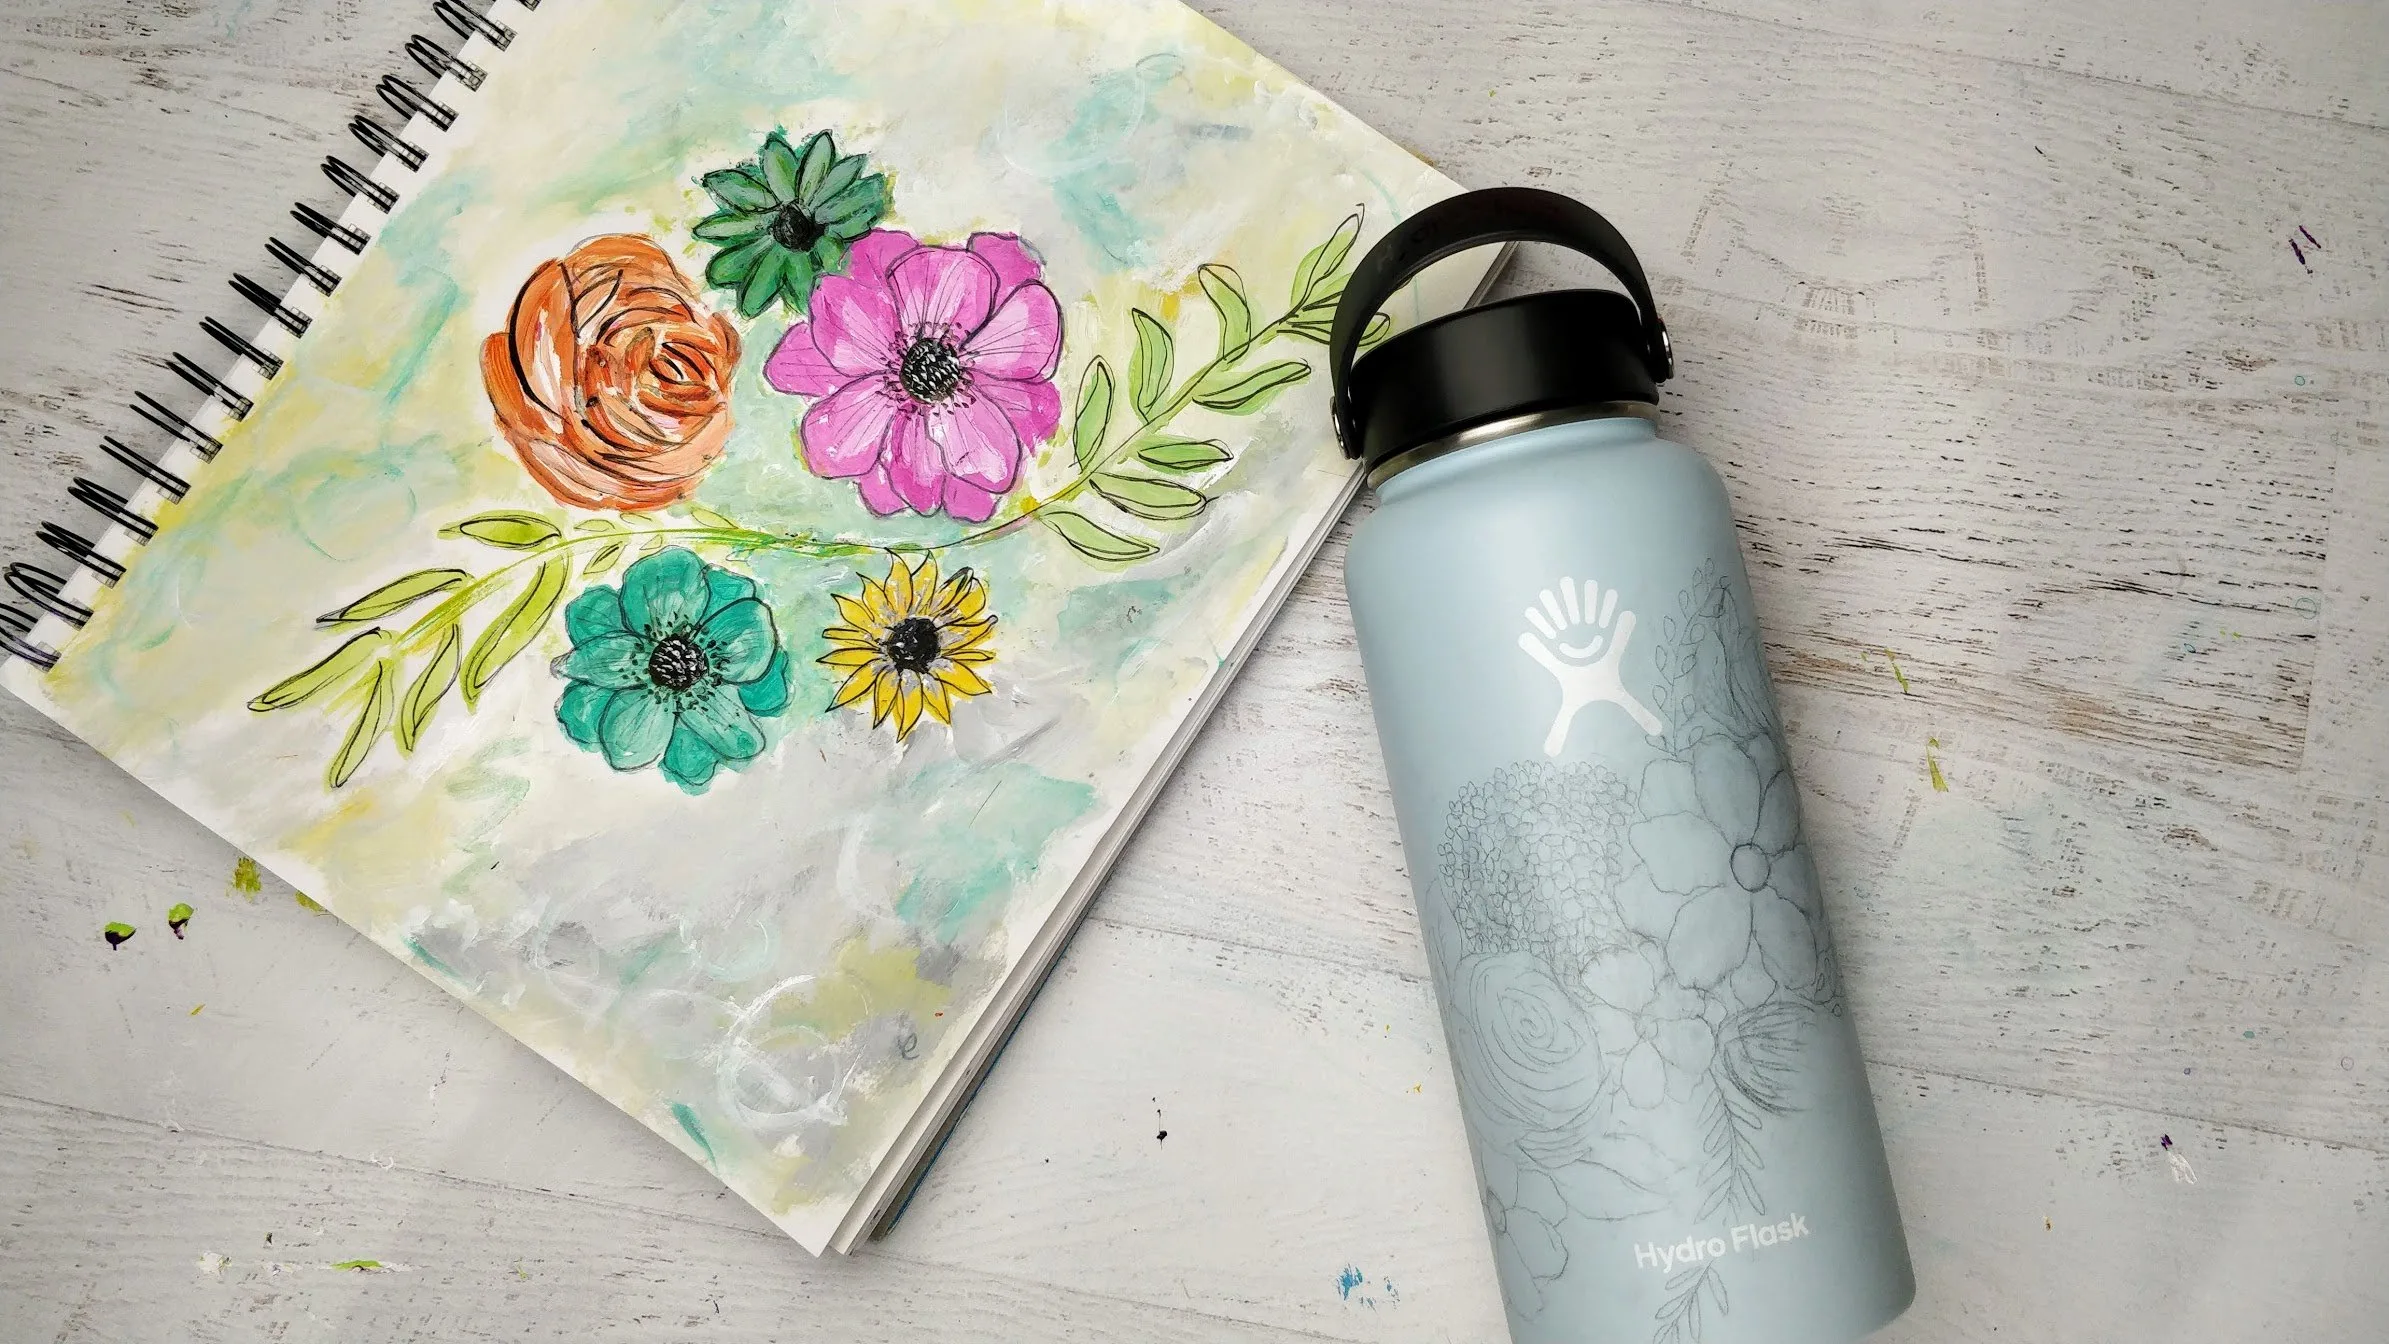 Hydroflask-Flowers-pencil-tracing-design